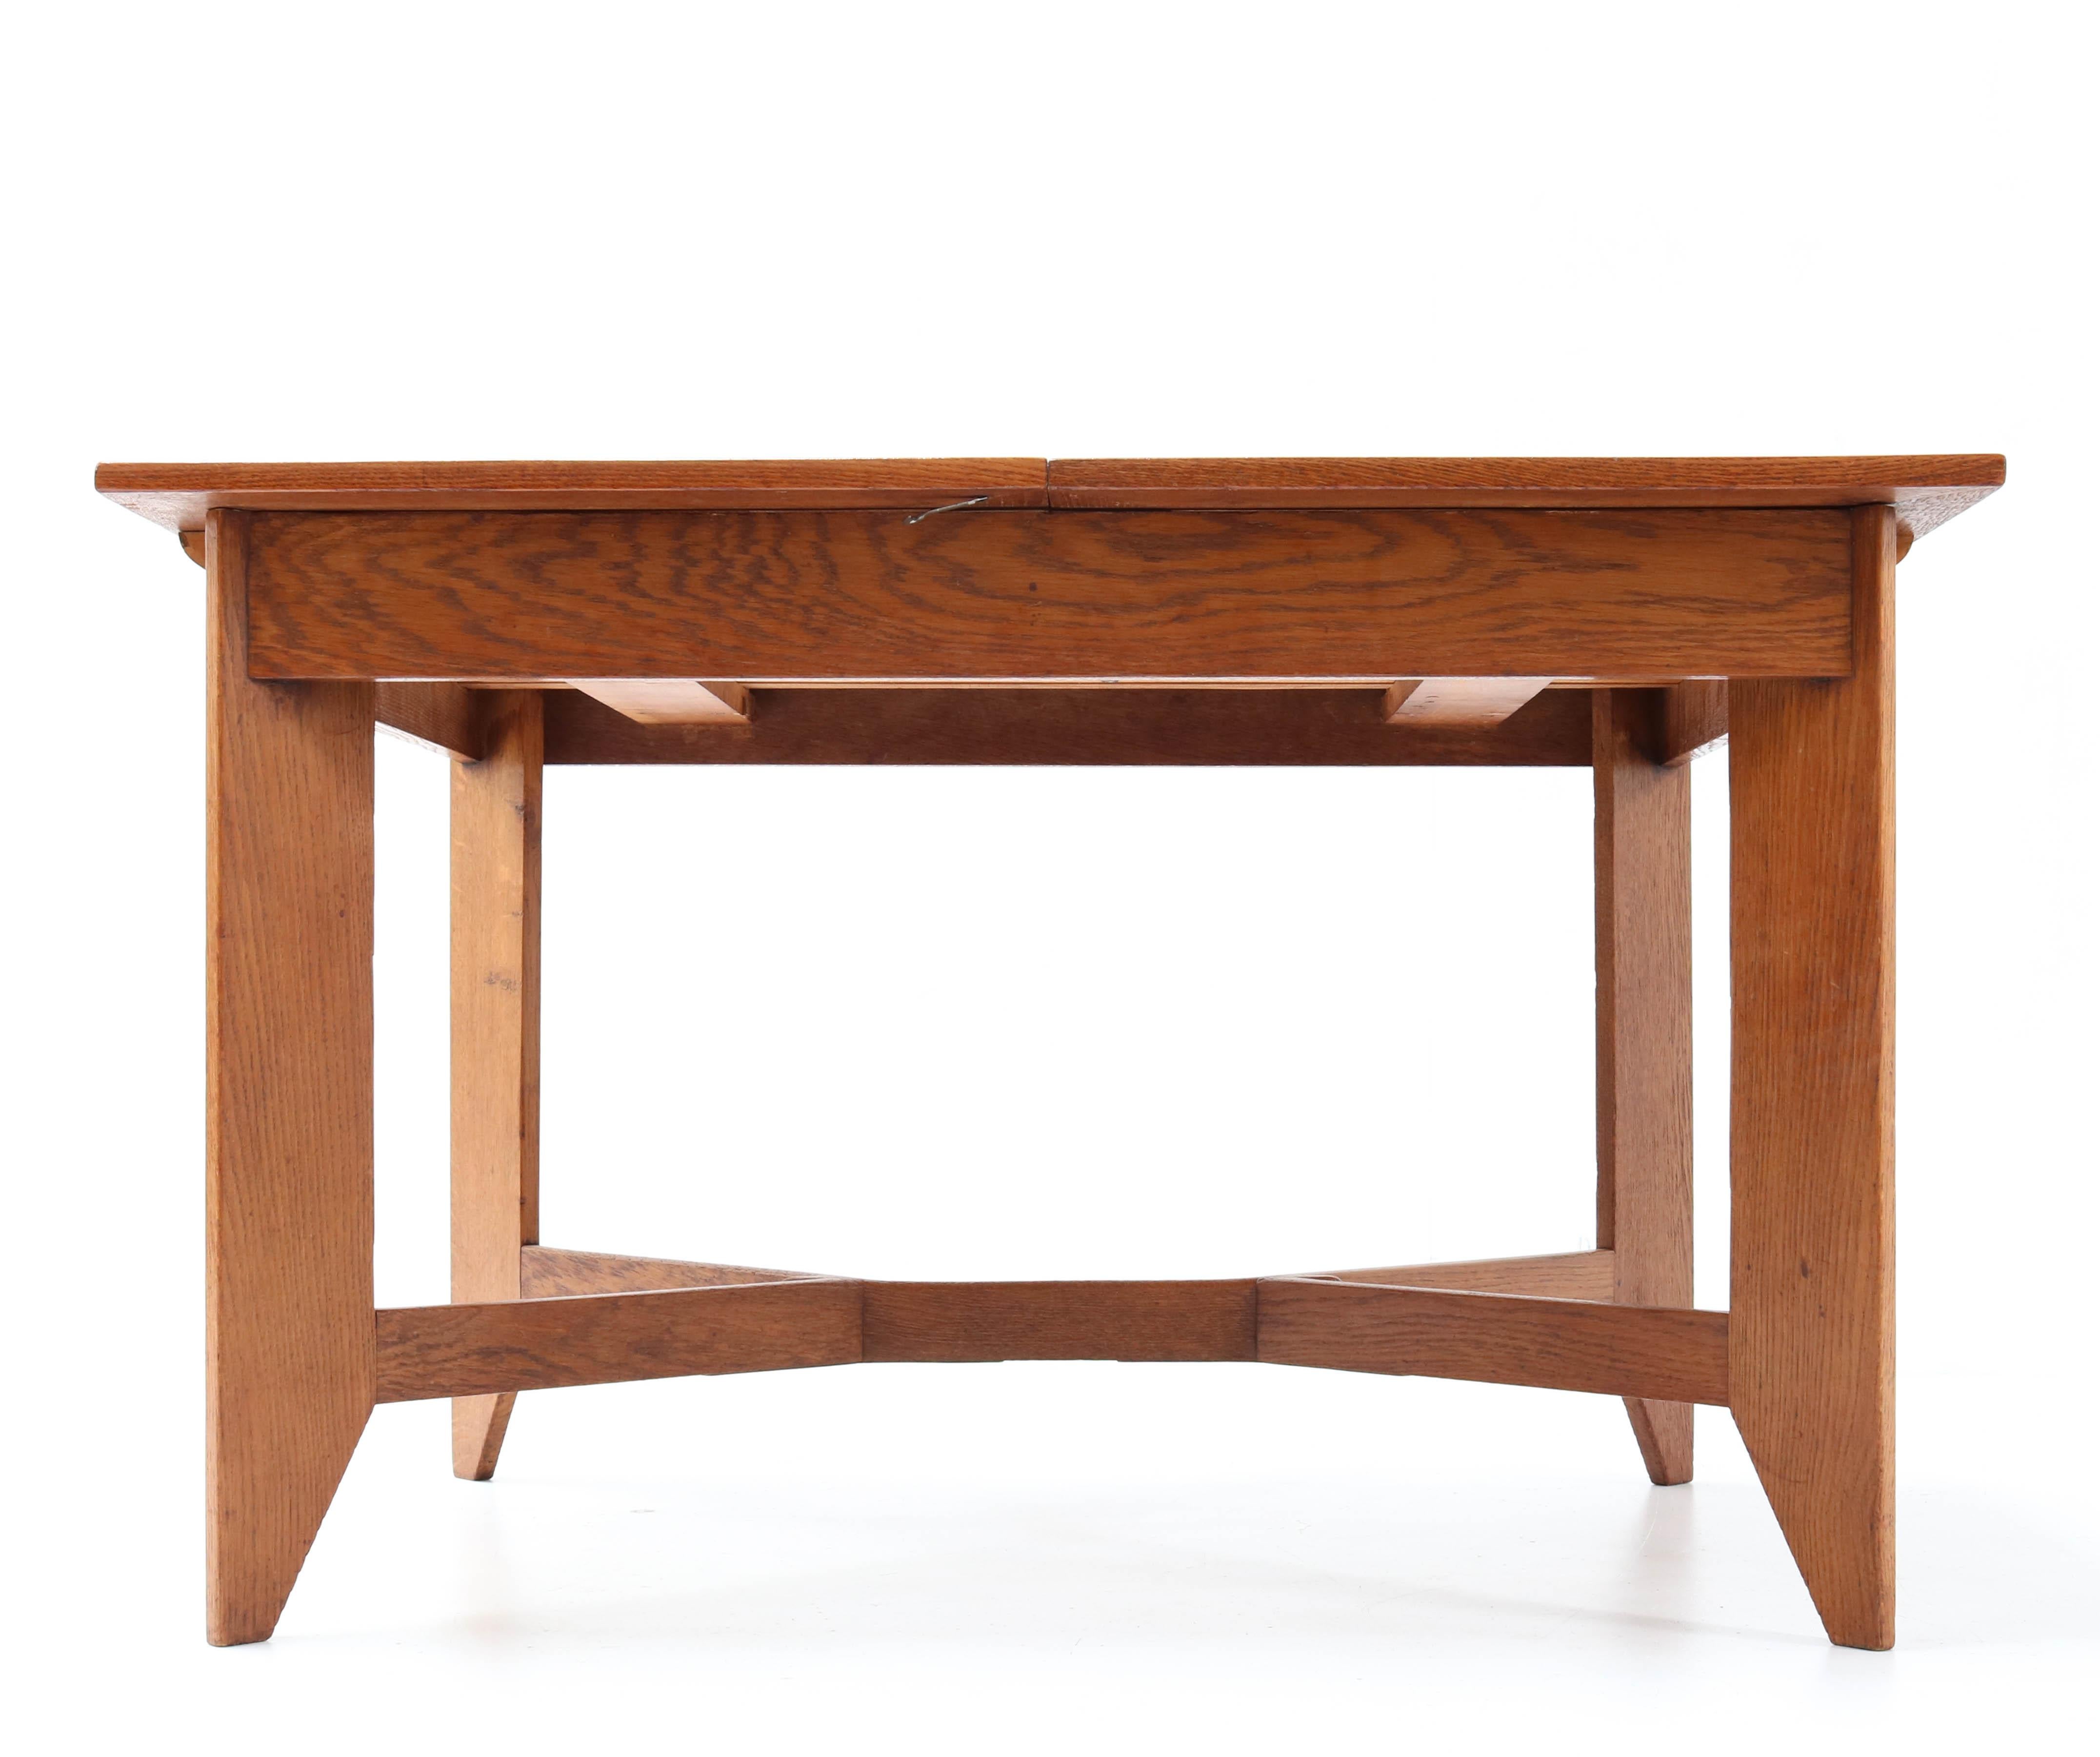 Early 20th Century Oak Art Deco Haagse School Dining Table by Hendrik Wouda for H. Pander & Zonen